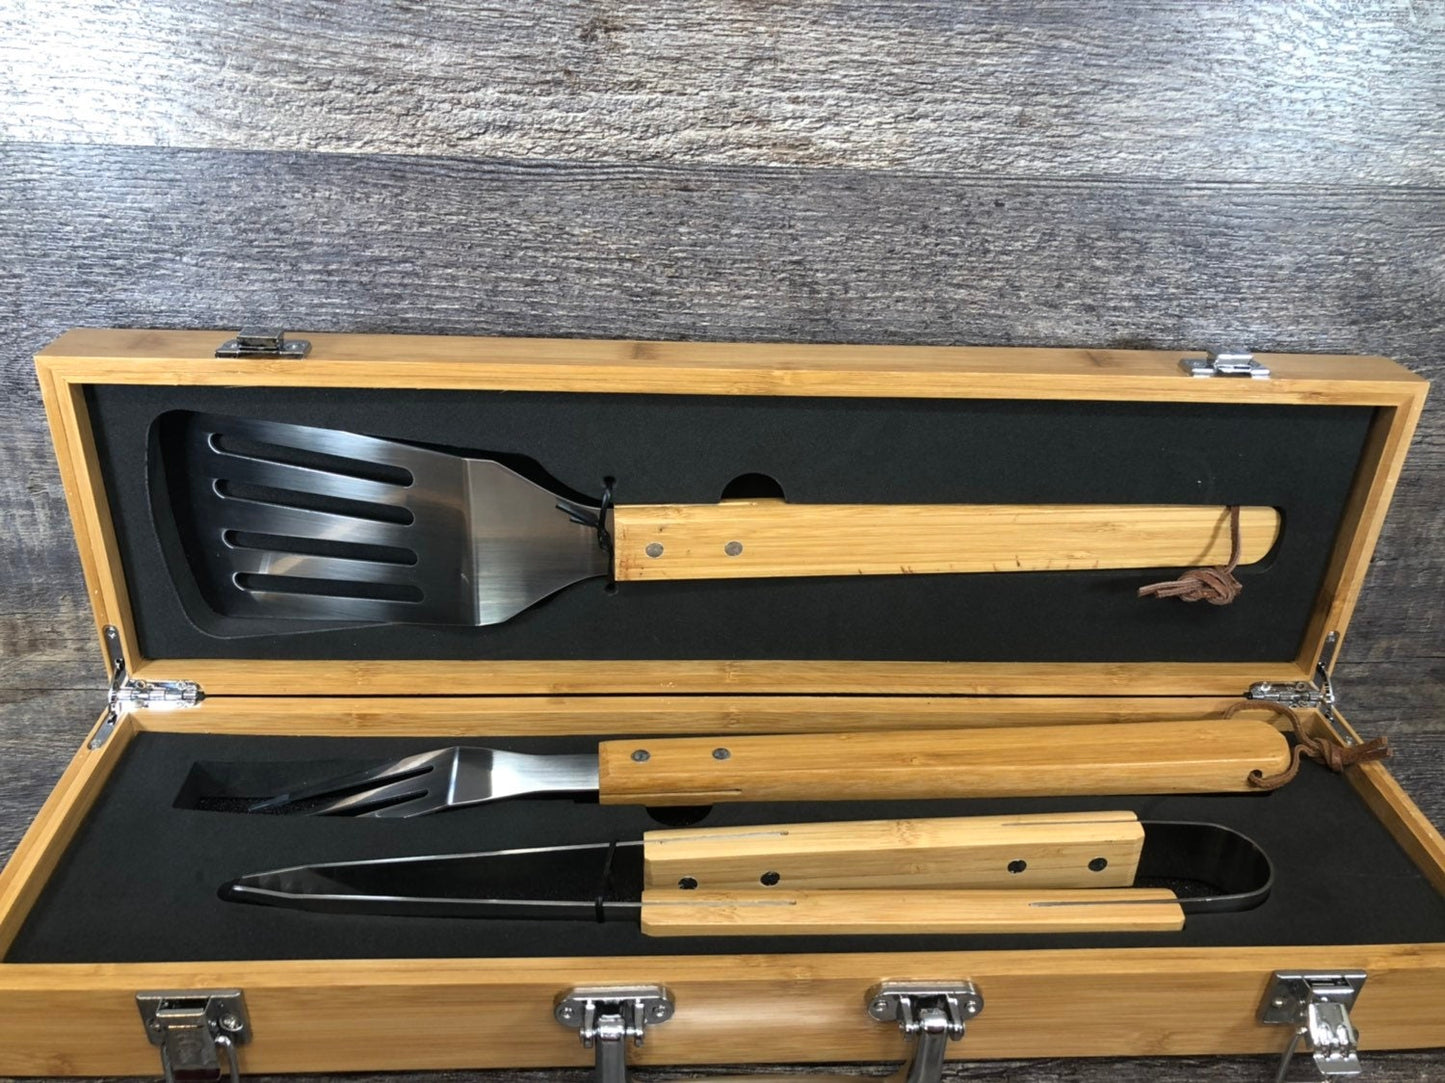 BBQ Set Grilling Tool Set Gift For Him Father's Day Gift Dad Birthday Gift Grill Master Gift Set Grilling Set Christmas Gift Bamboo